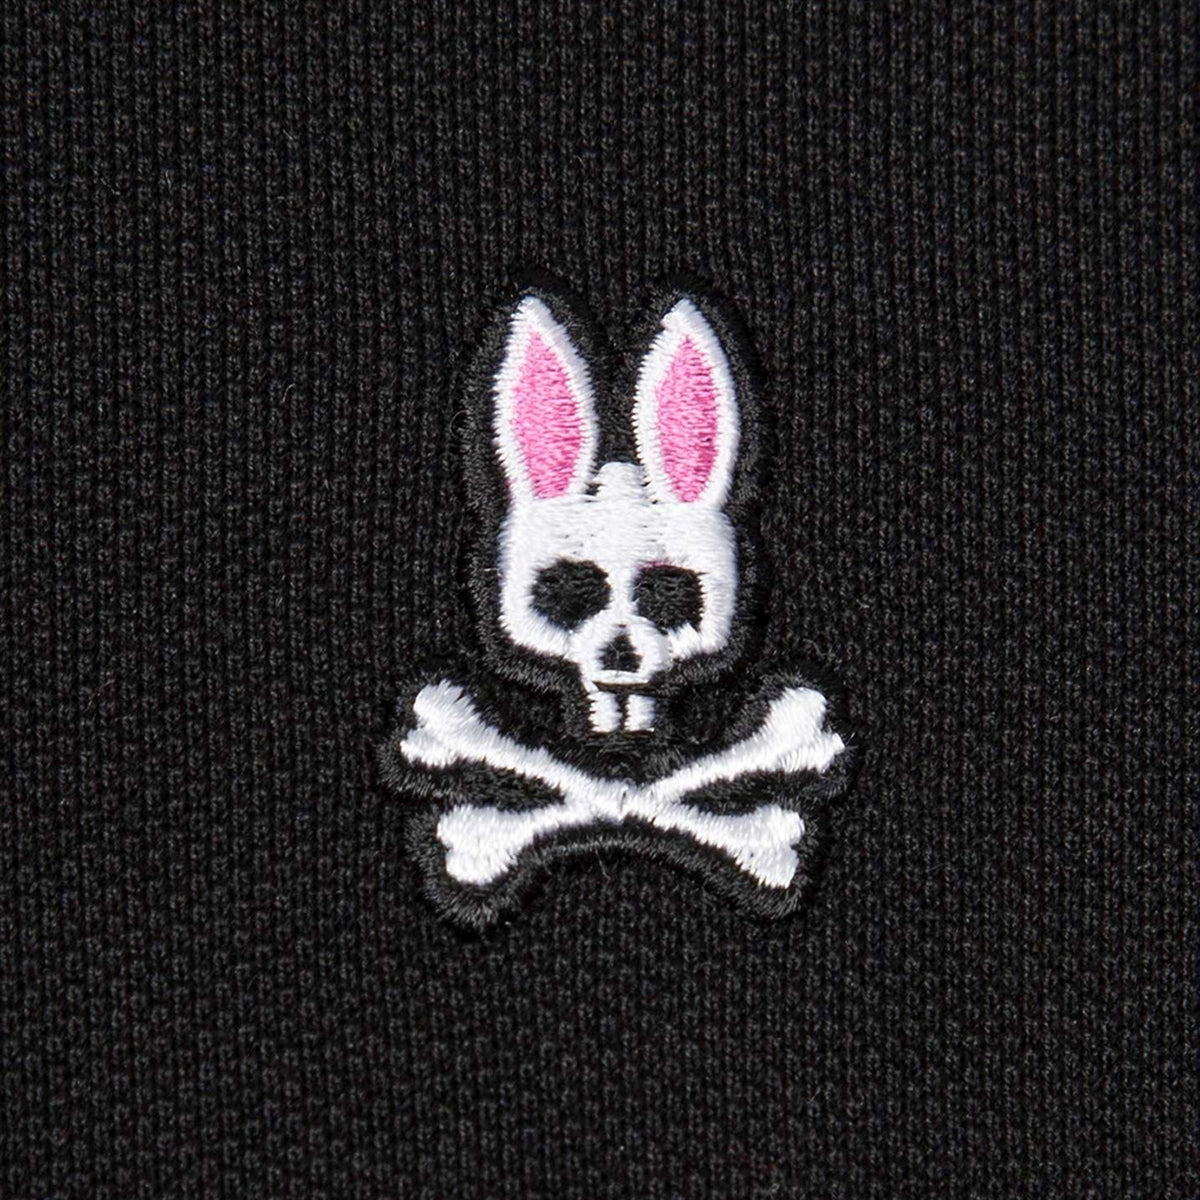 Men&#39;s PSYCHO BUNNY - &quot;LONG SLEEVED POLO&quot; in Black